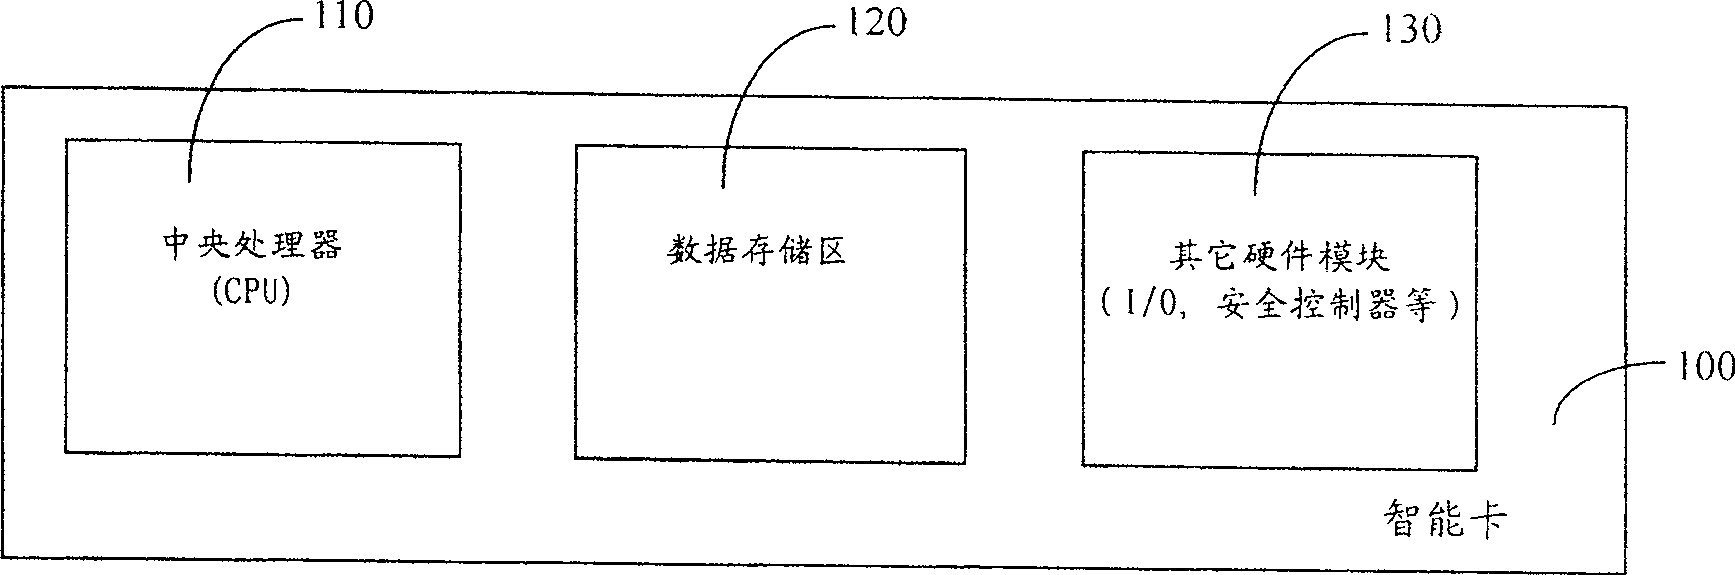 Mass storing and managing method of smart card